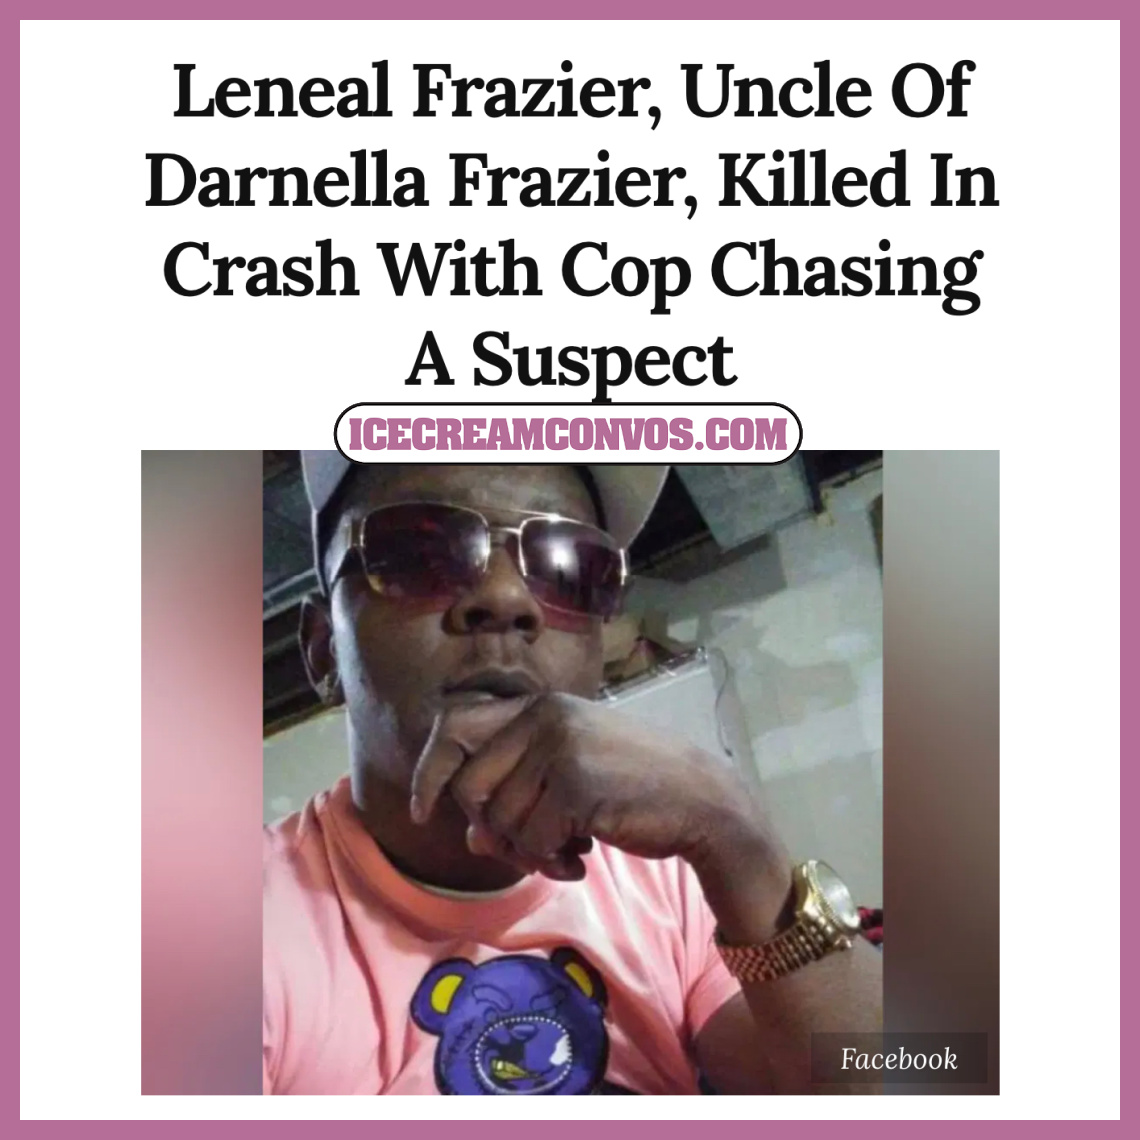 Leneal Frazier, the uncle of Darnella Frazier, was killed when a Minneapolis cop, who was chasing a suspect, crashed into his vehicle. 😞🙏🏾🖤🍦

Full Story 👉🏾 bit.ly/3yBAjL1

#LenealFrazier #DarnellaFrazier #RIP

Please join me in uplifting this family in prayer.